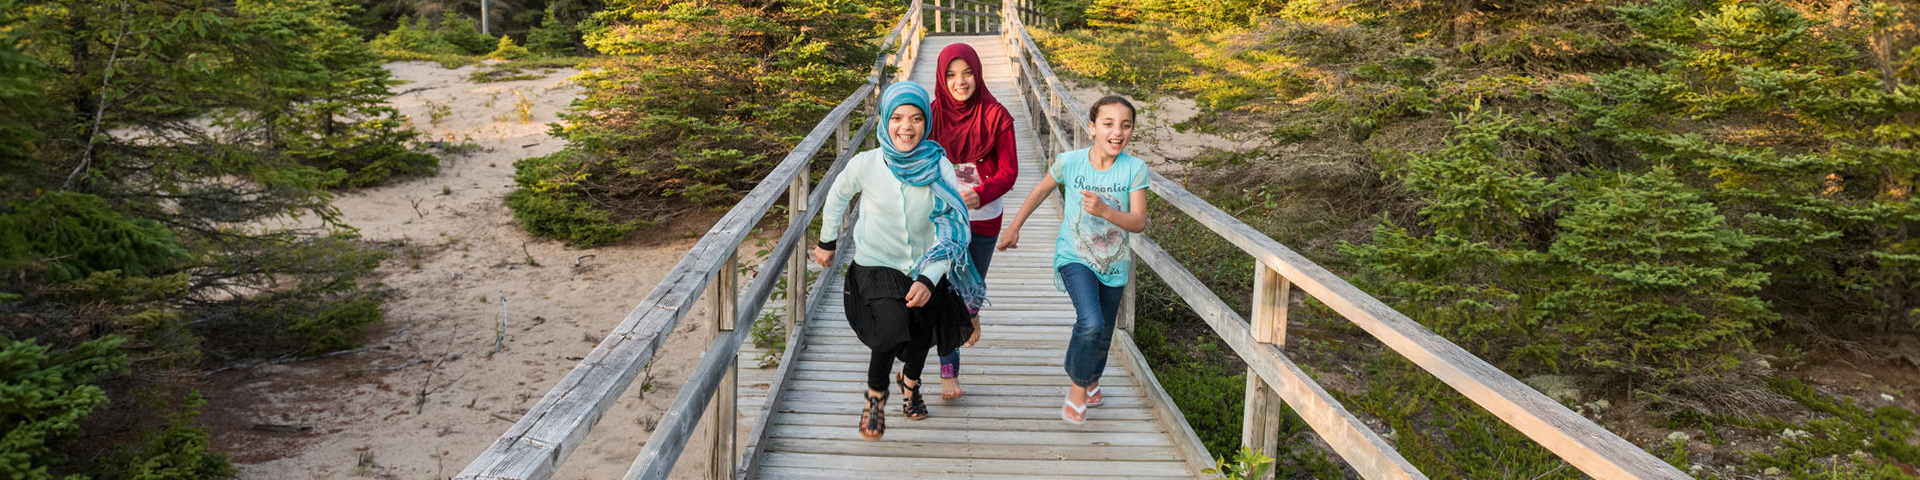 A group of children are running on a boardwalk with trees around them at Pukaskwa National Park.